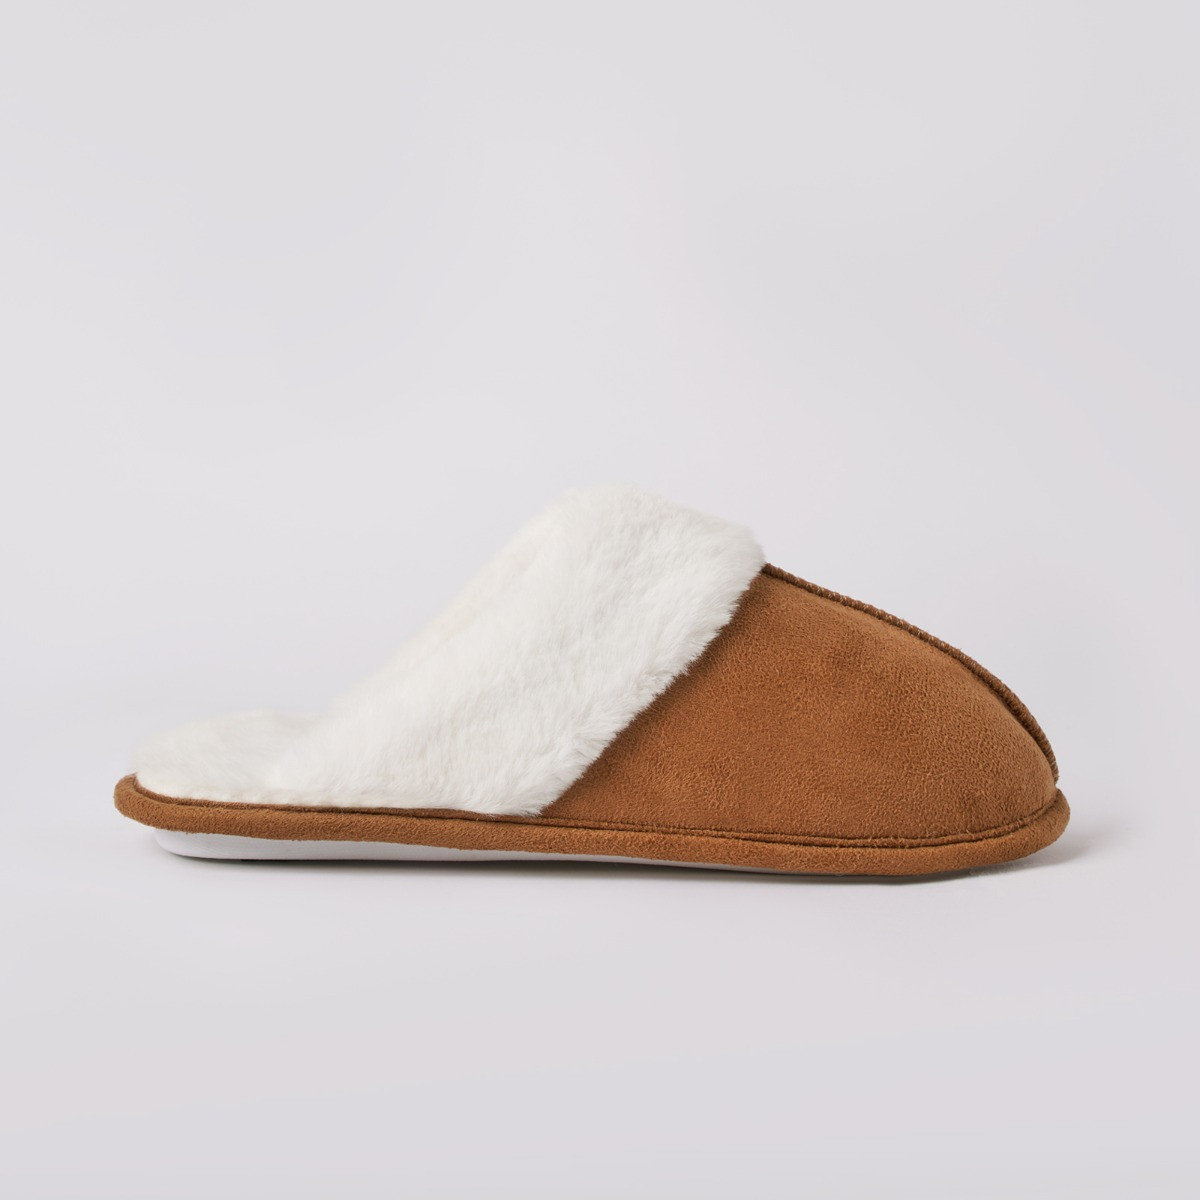 OHS Faux Suede Mule Slippers - Tan>